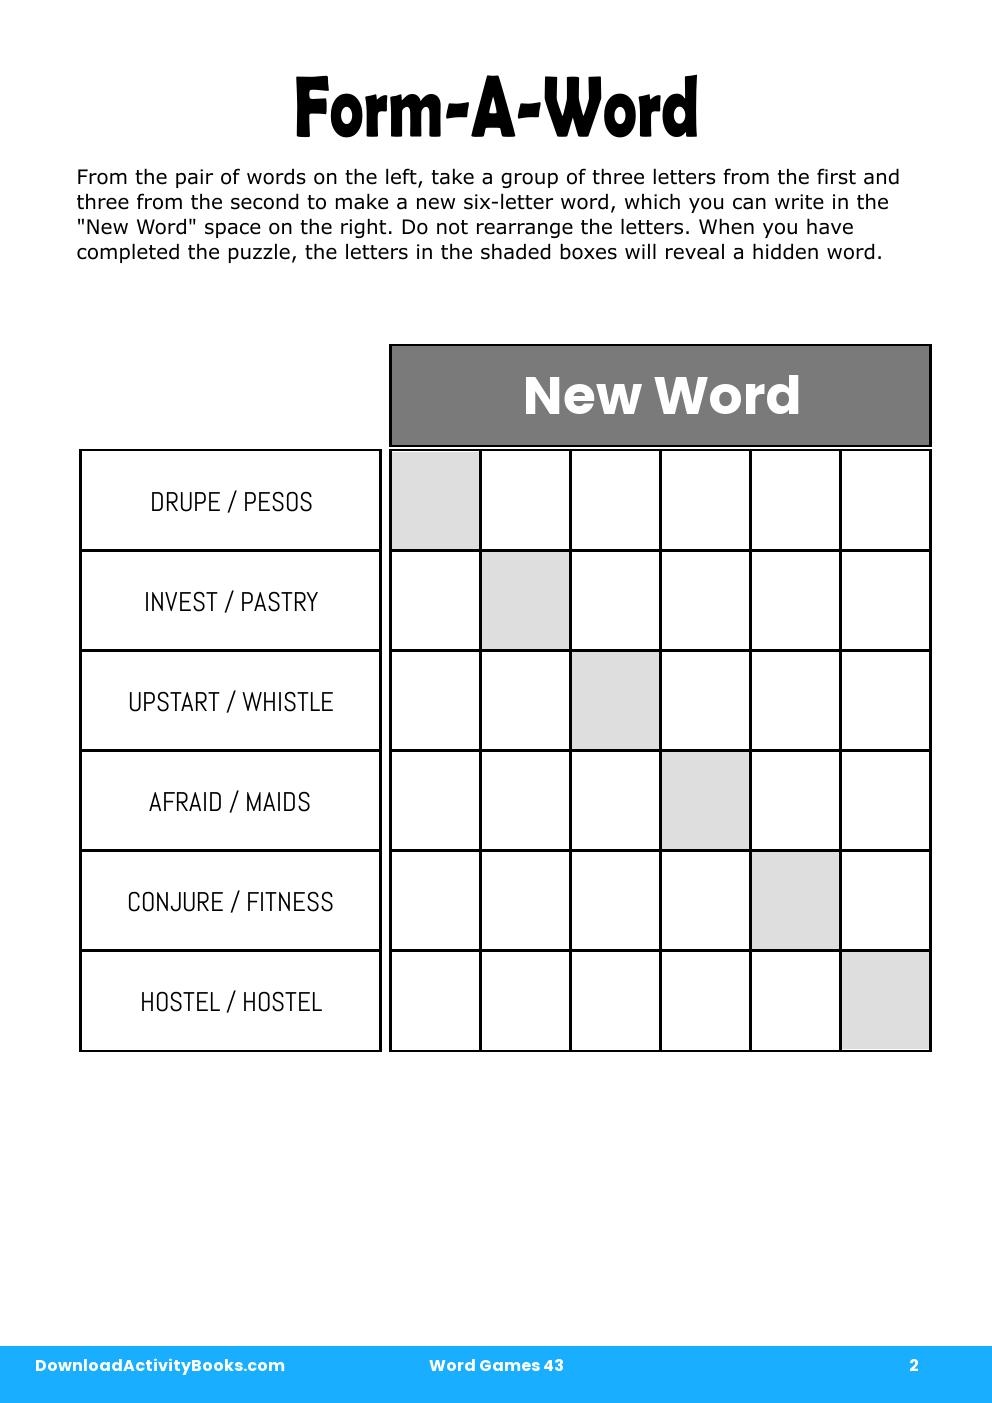 Form-A-Word in Word Games 43